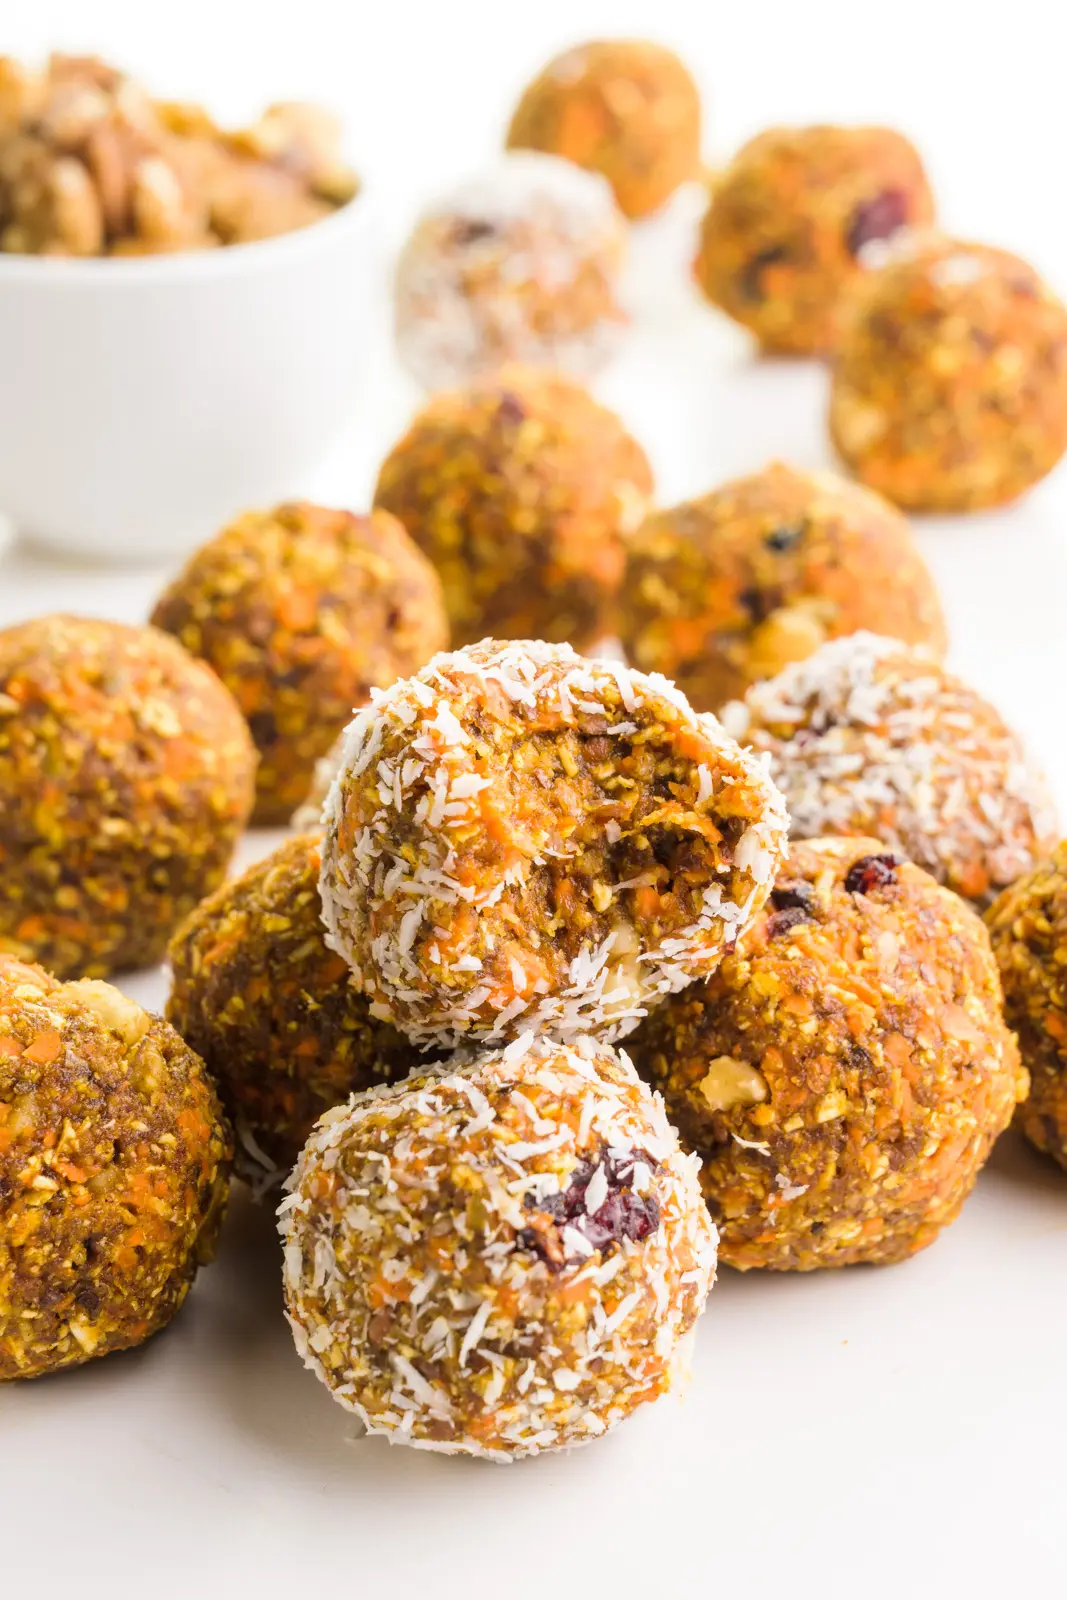 A group of carrot cake energy balls sits around a bowl of walnuts. One of the treats has a bite taken out of it.